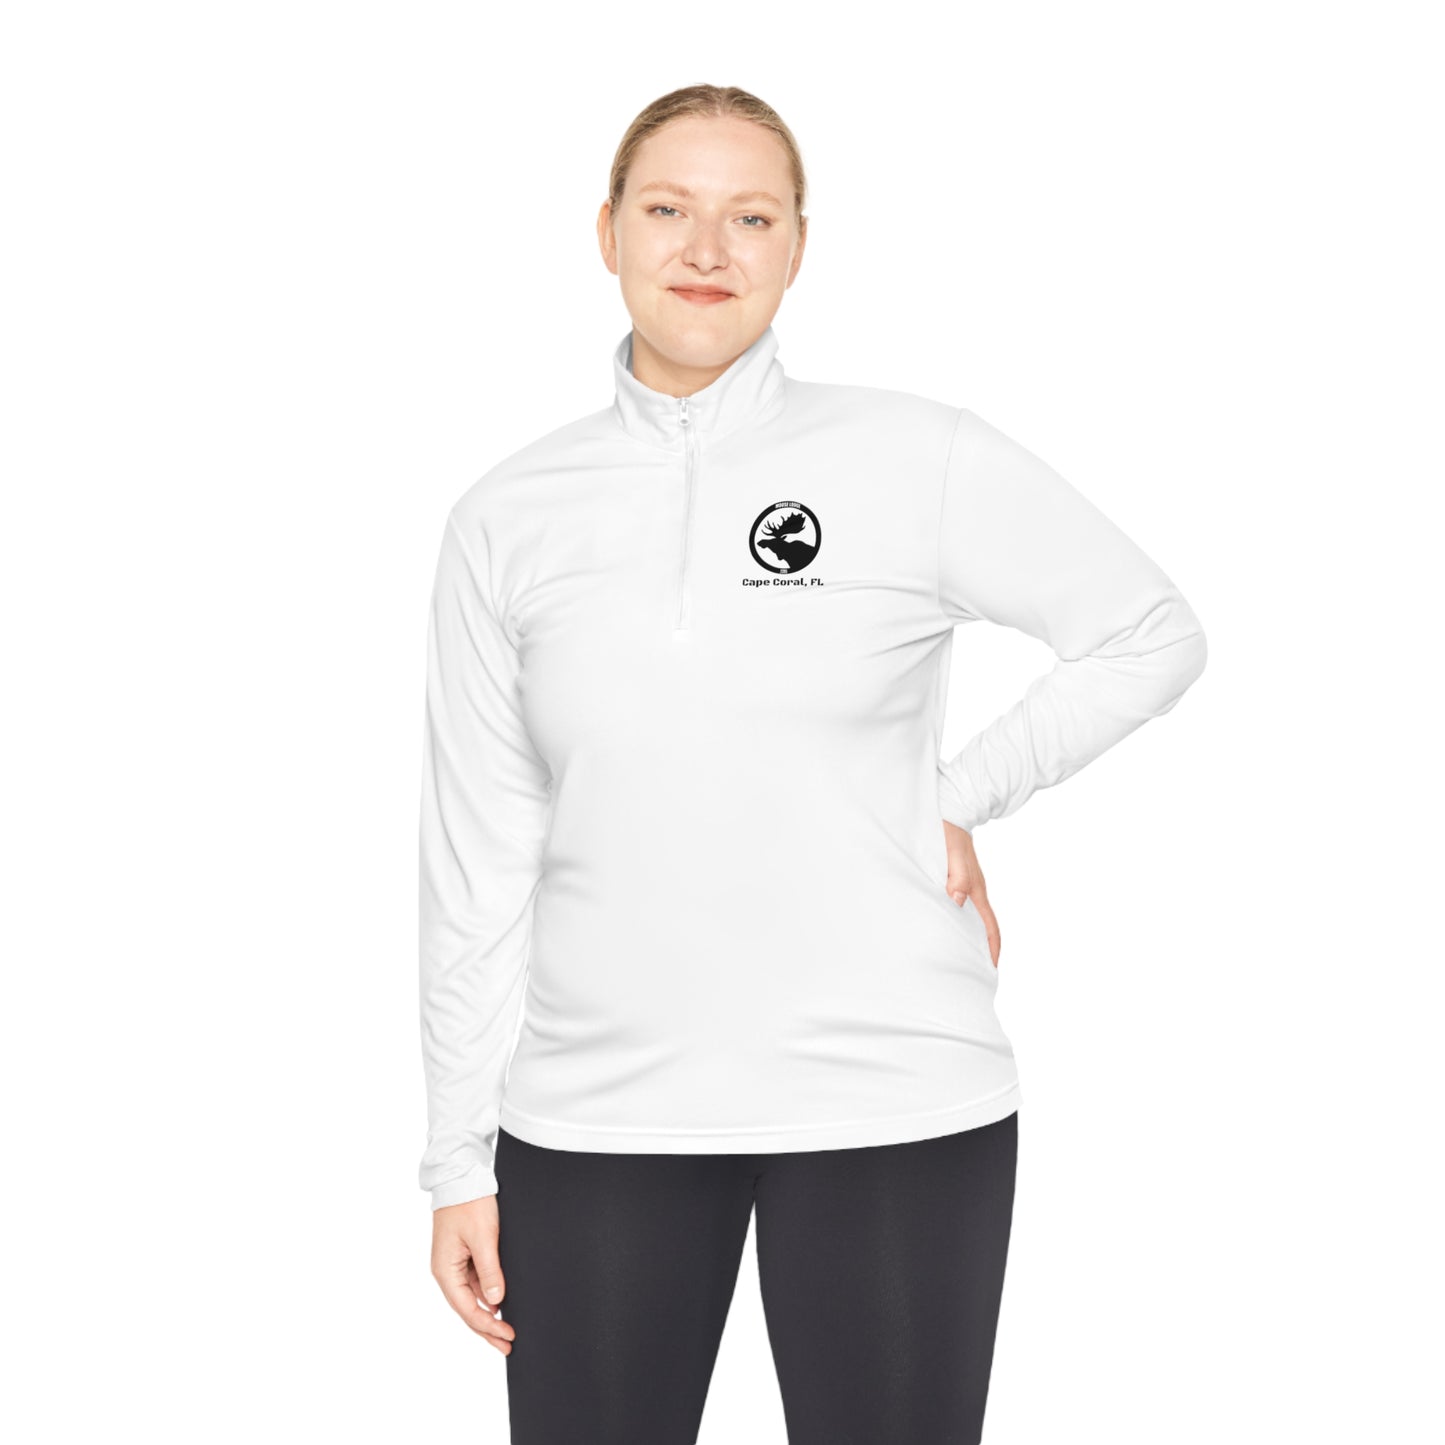 Unisex Quarter-Zip PULLOVER (FRONT Graphics Only)